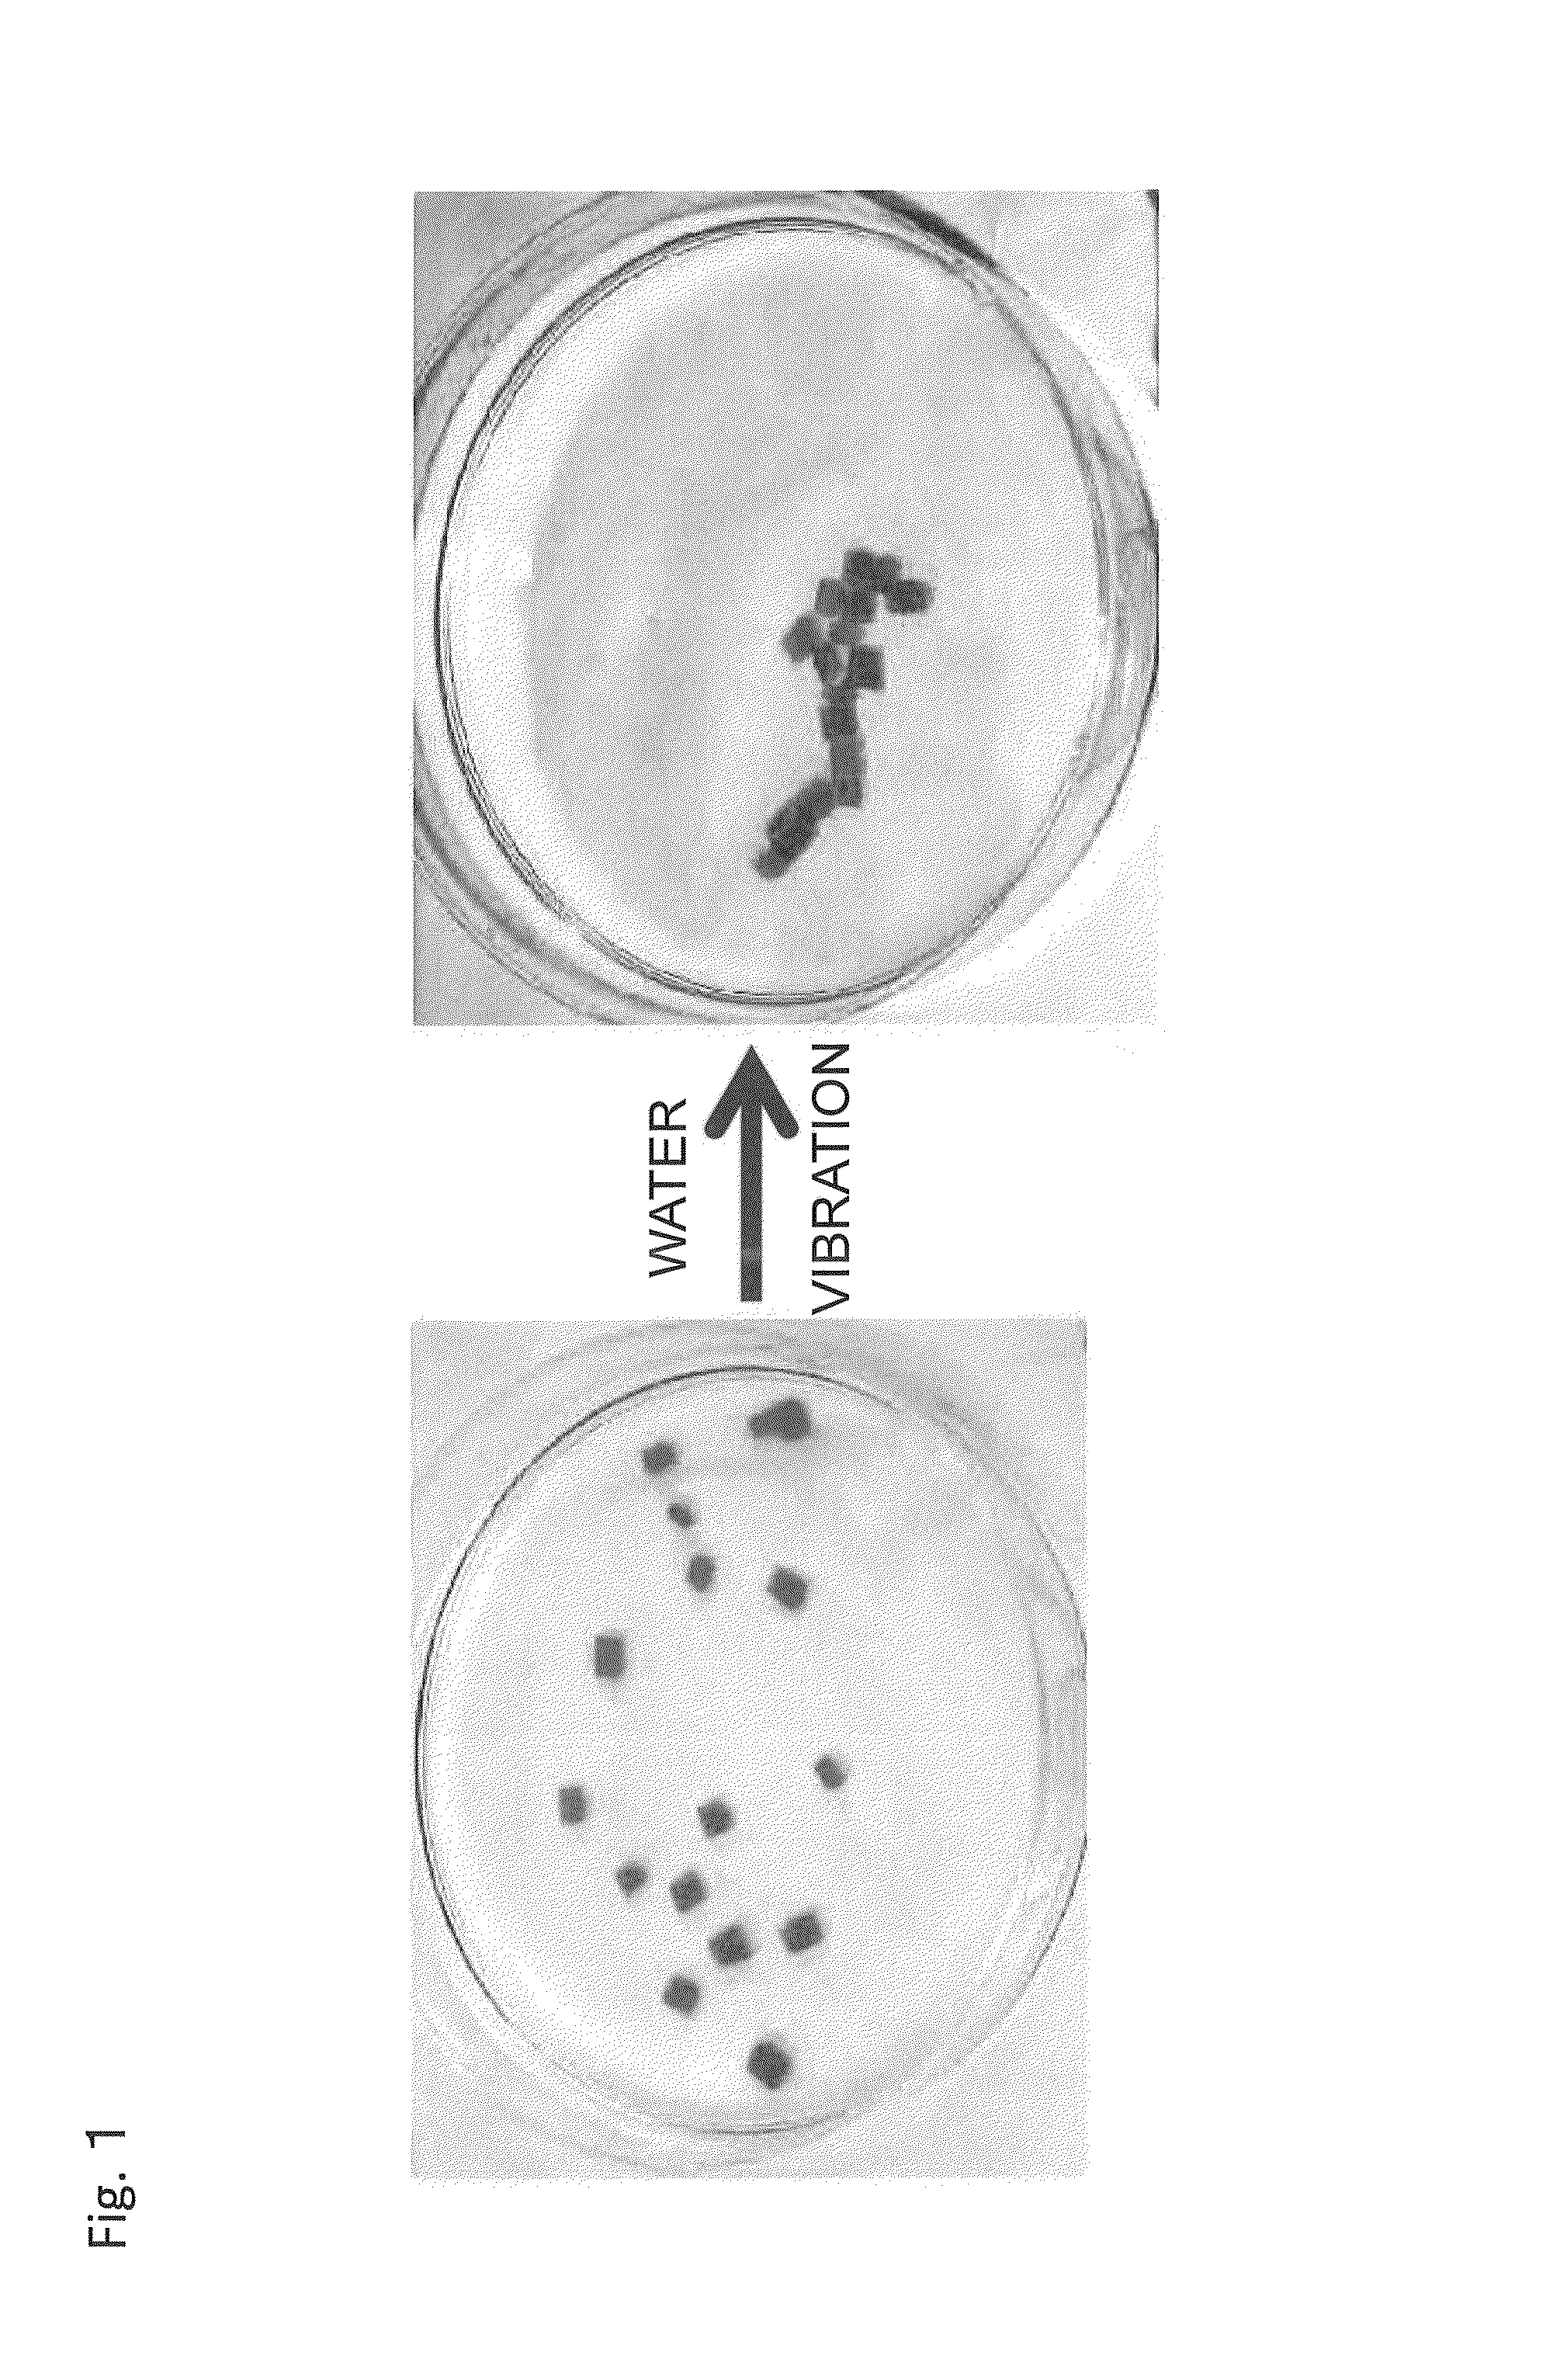 Material self-assembly method and selective adhesion method based on molecular recognition